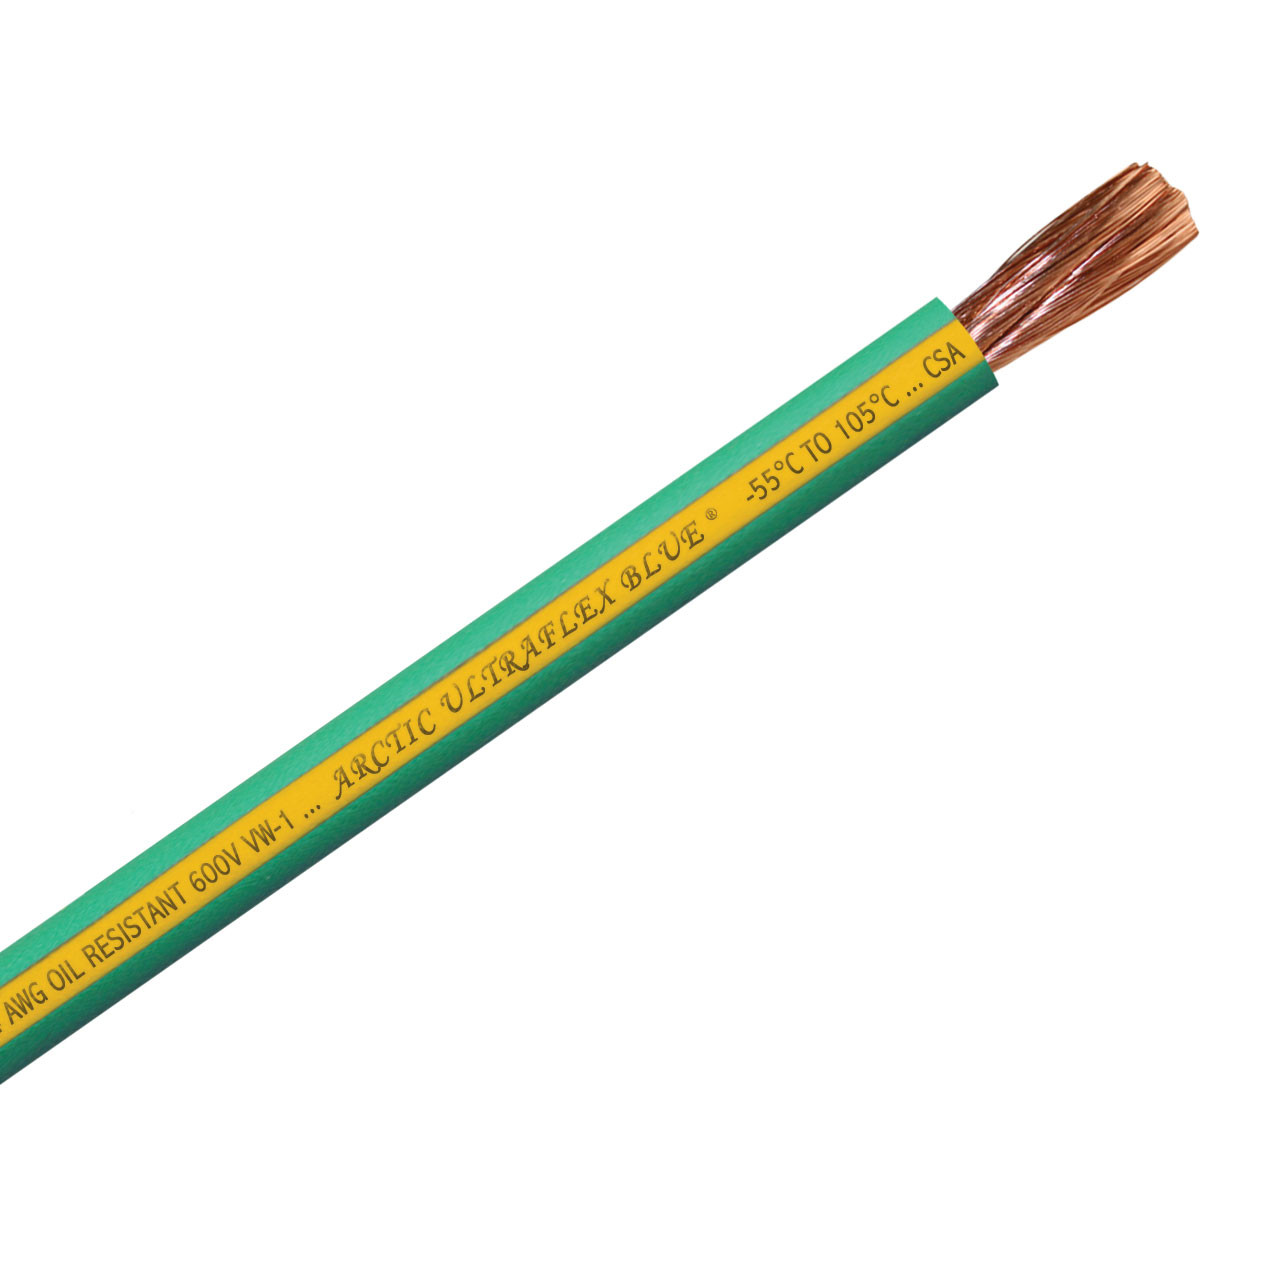 4 AWG green with yellow stripe 100% copper Arctic Ultraflex Blue flexible fine strand arctic grade wire is rated for use in extreme cold to -55C